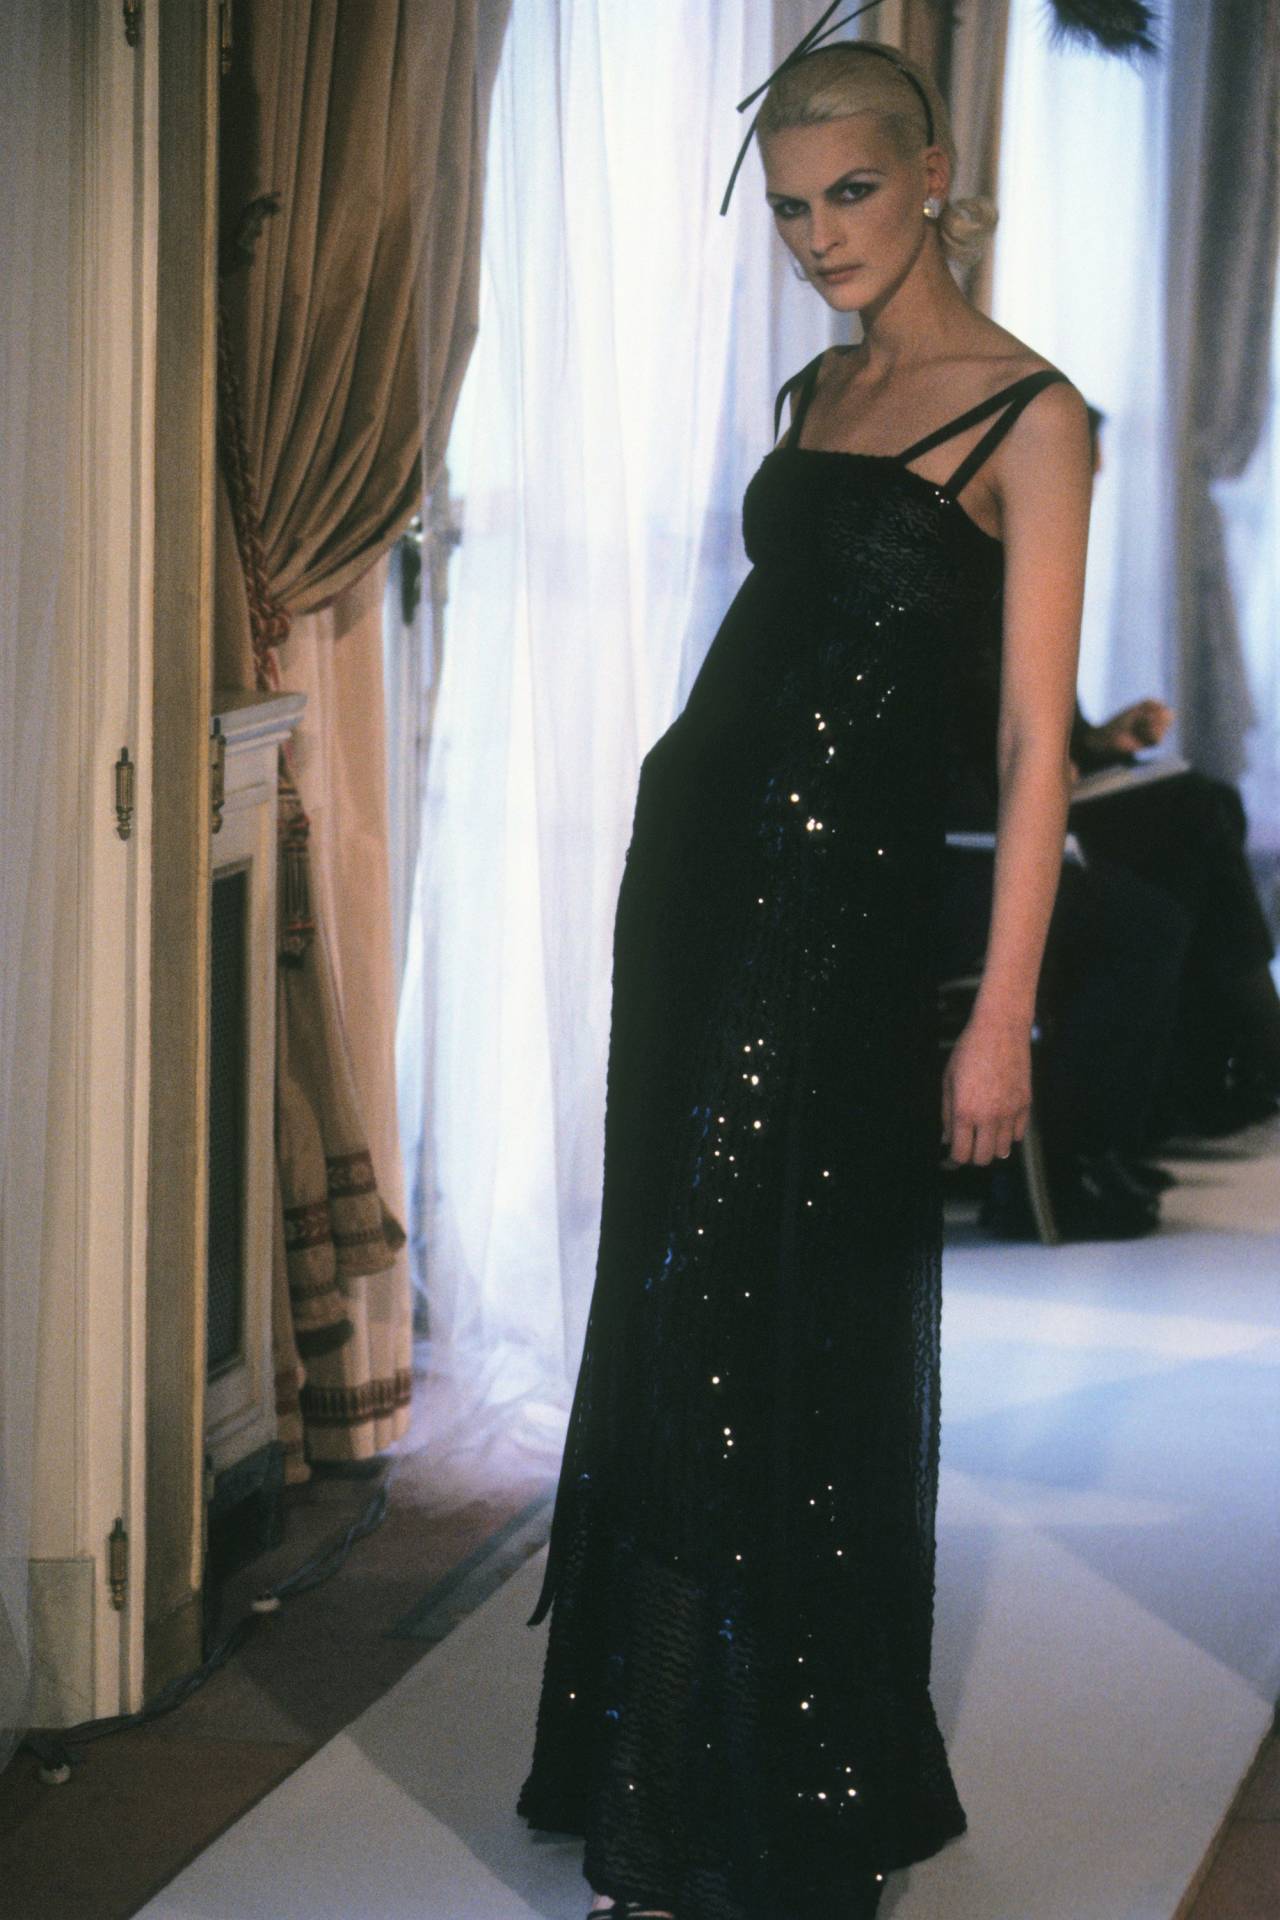 Chanel Spring 1997 Couture Collection inspires trends still to this day. –  Bustier